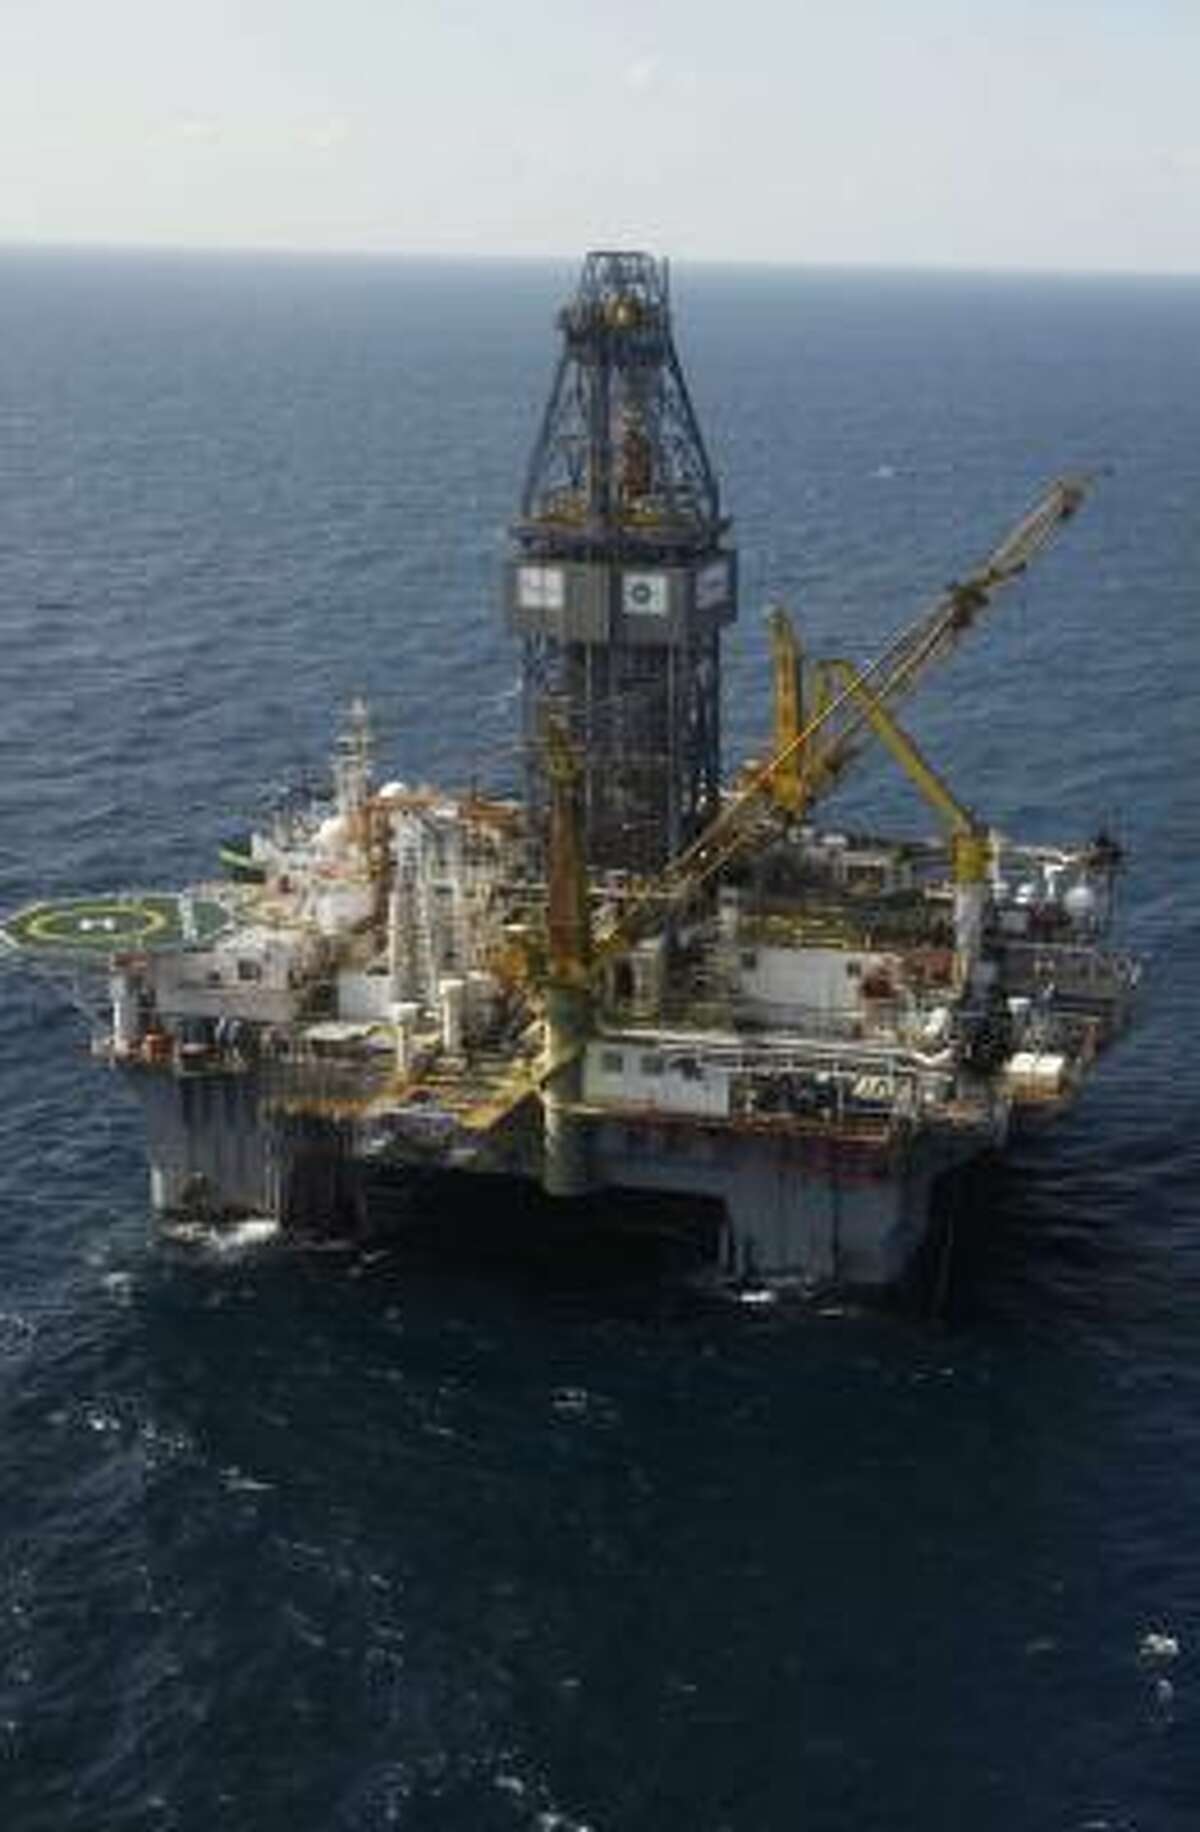 The Development Driller III created the relief well and pumped the cement to seal the leaking Macondo well, the source of the Deepwater Horizon rig explosion and oil spill.